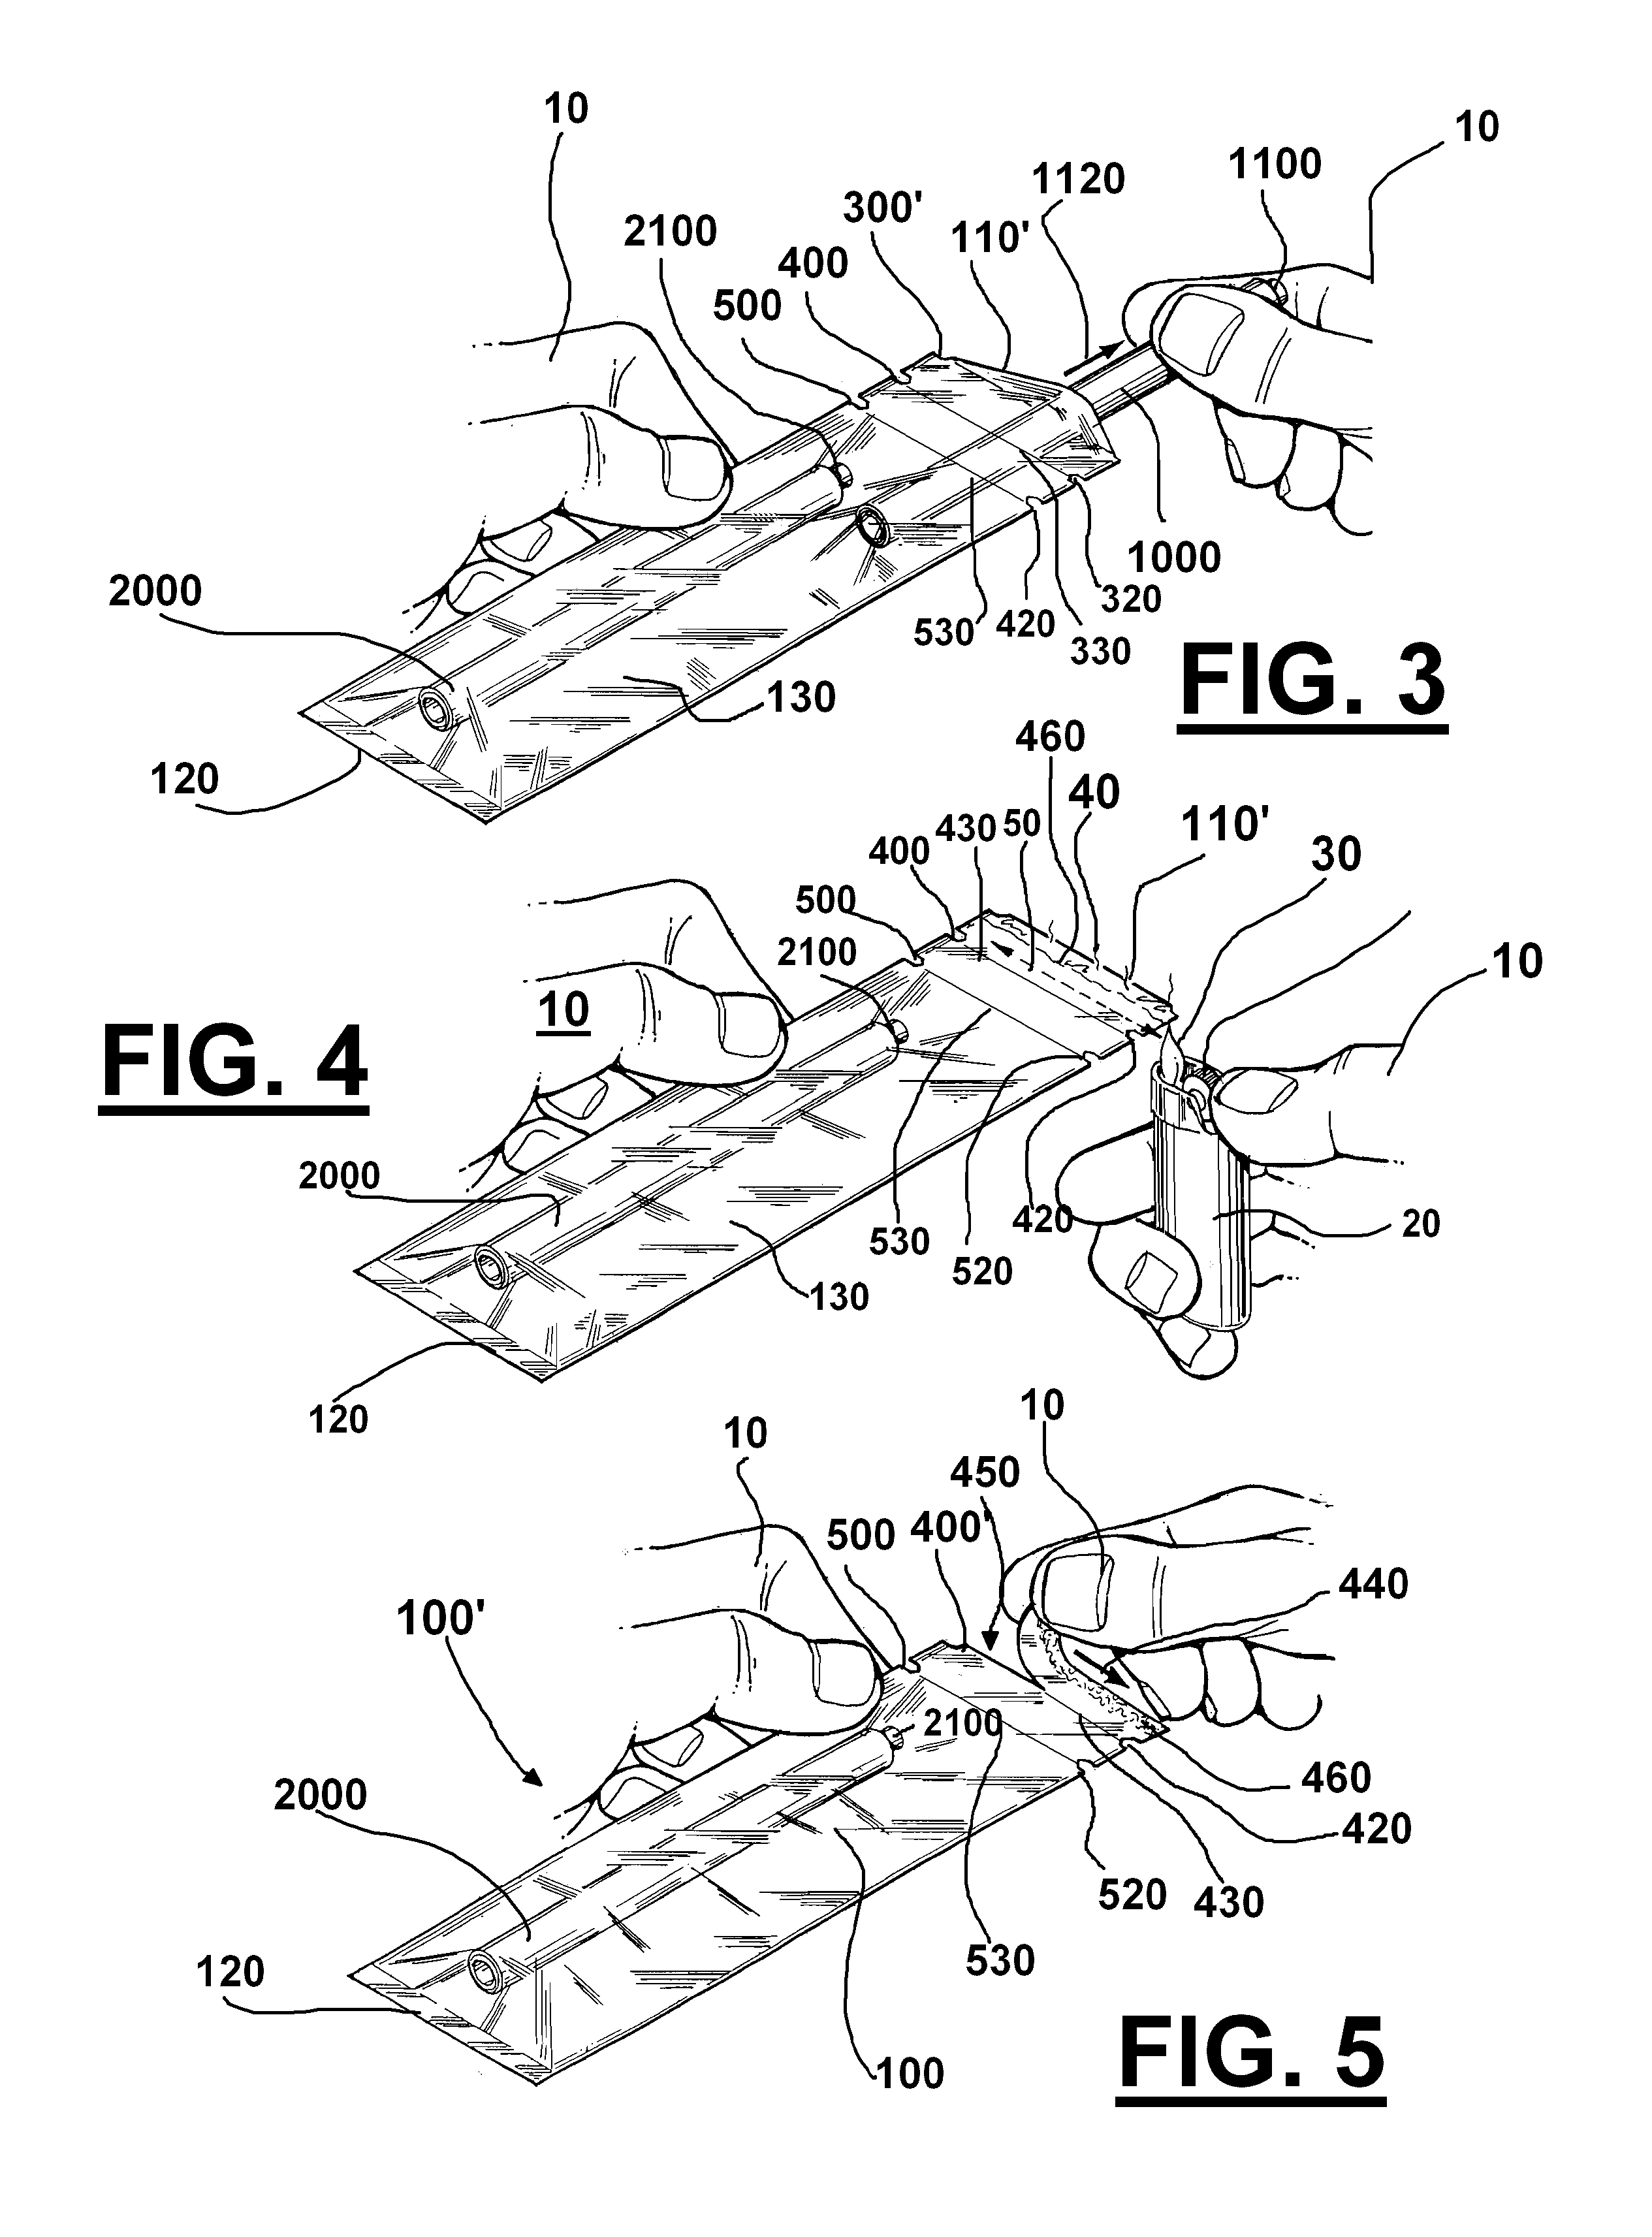 Method and apparatus for making a custom made cigar using resealable packaging unit or pouch having multiple cigar wrappers